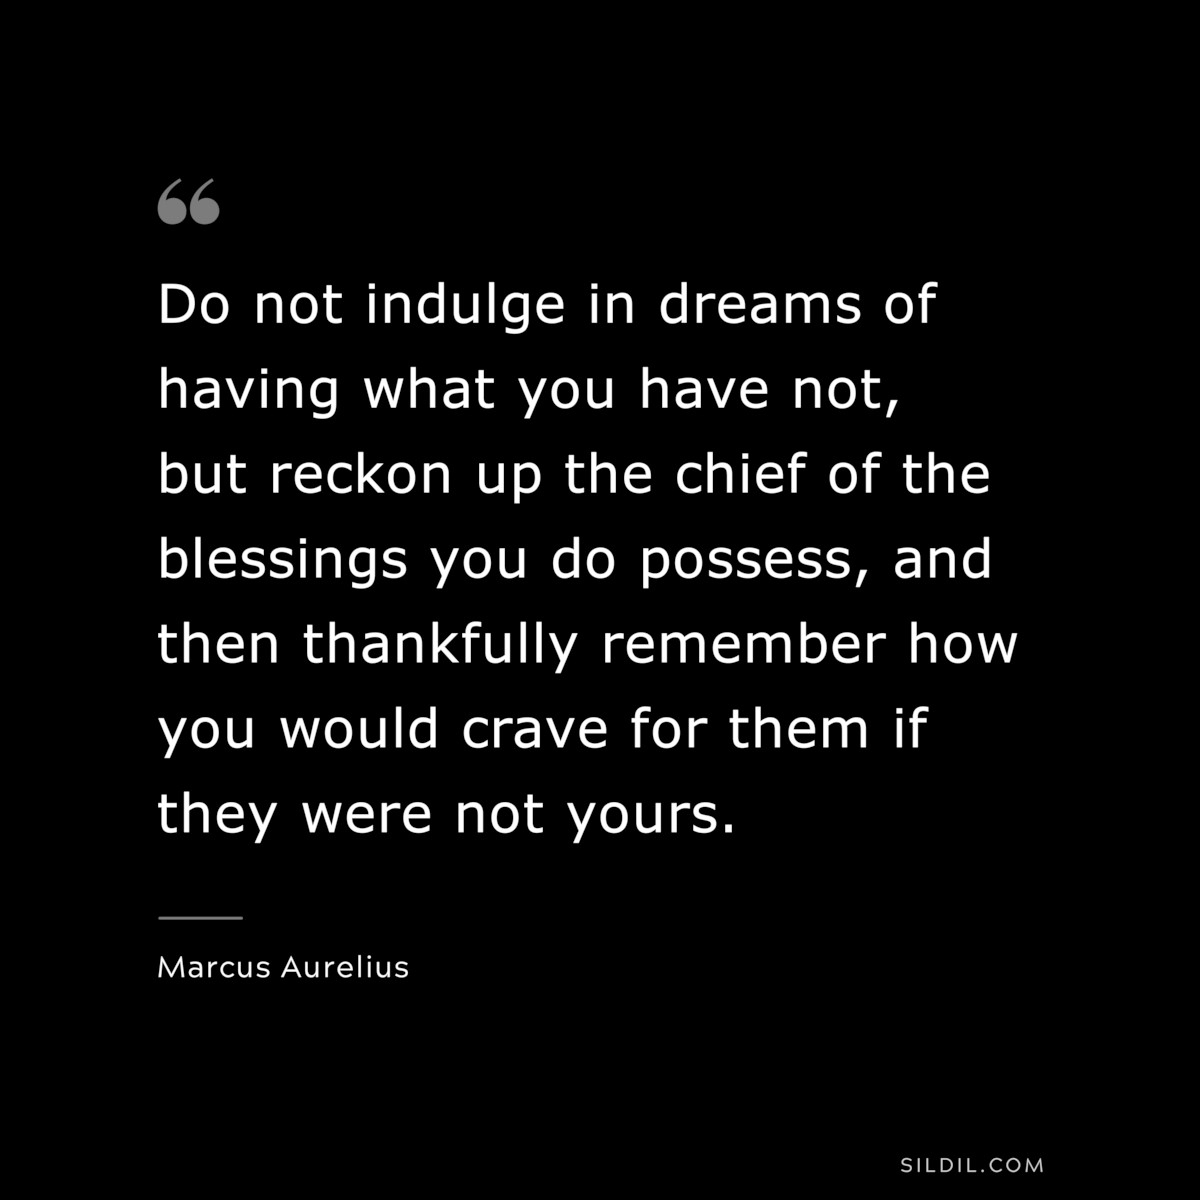 Do not indulge in dreams of having what you have not, but reckon up the chief of the blessings you do possess, and then thankfully remember how you would crave for them if they were not yours. ― Marcus Aurelius